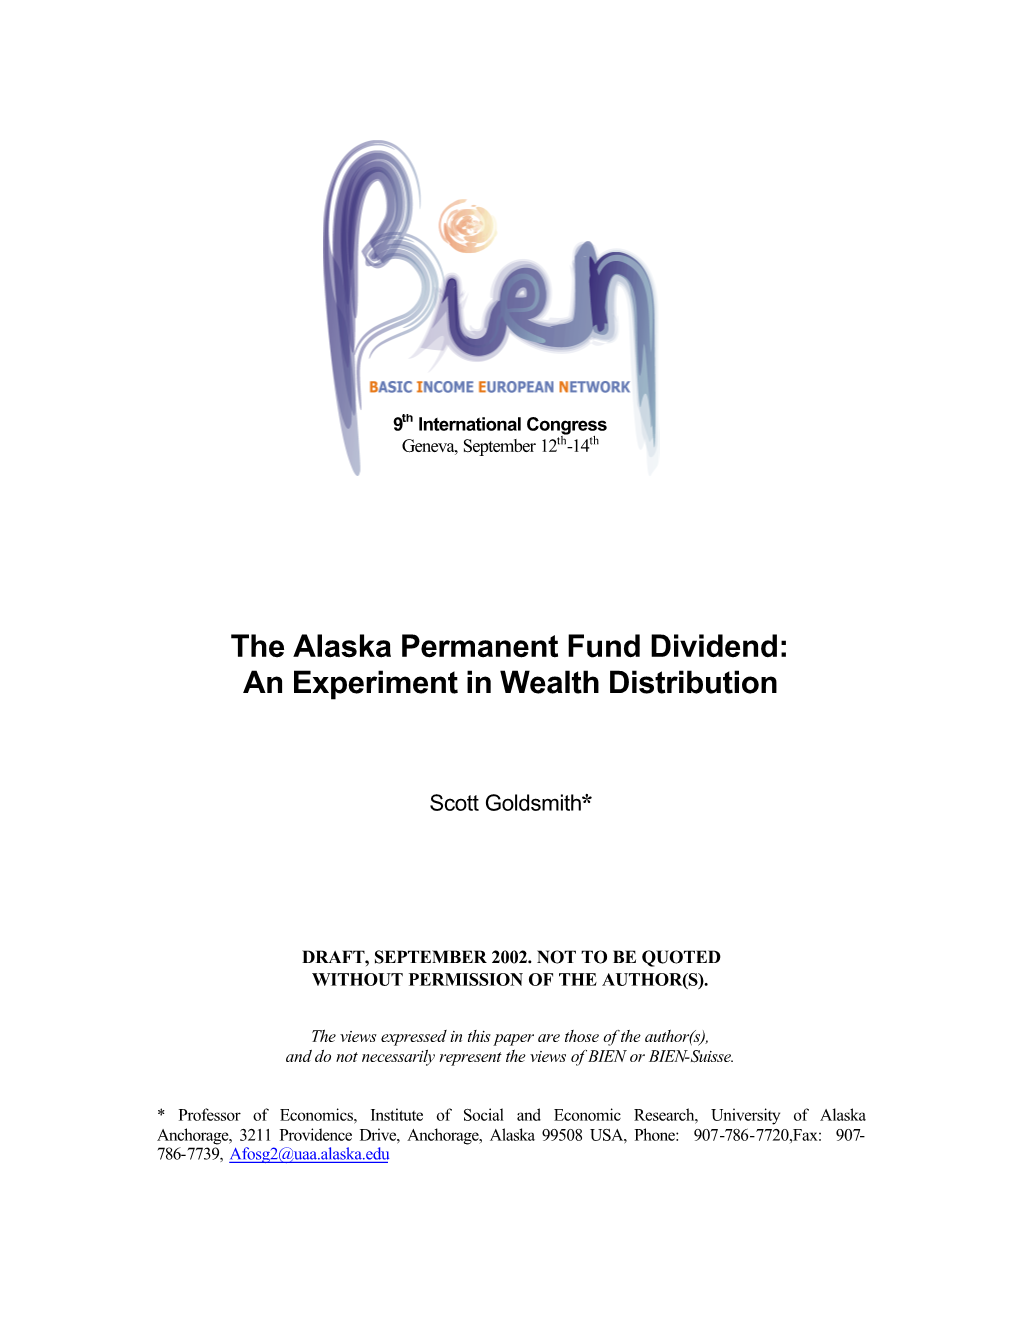 The Alaska Permanent Fund Dividend: an Experiment in Wealth Distribution